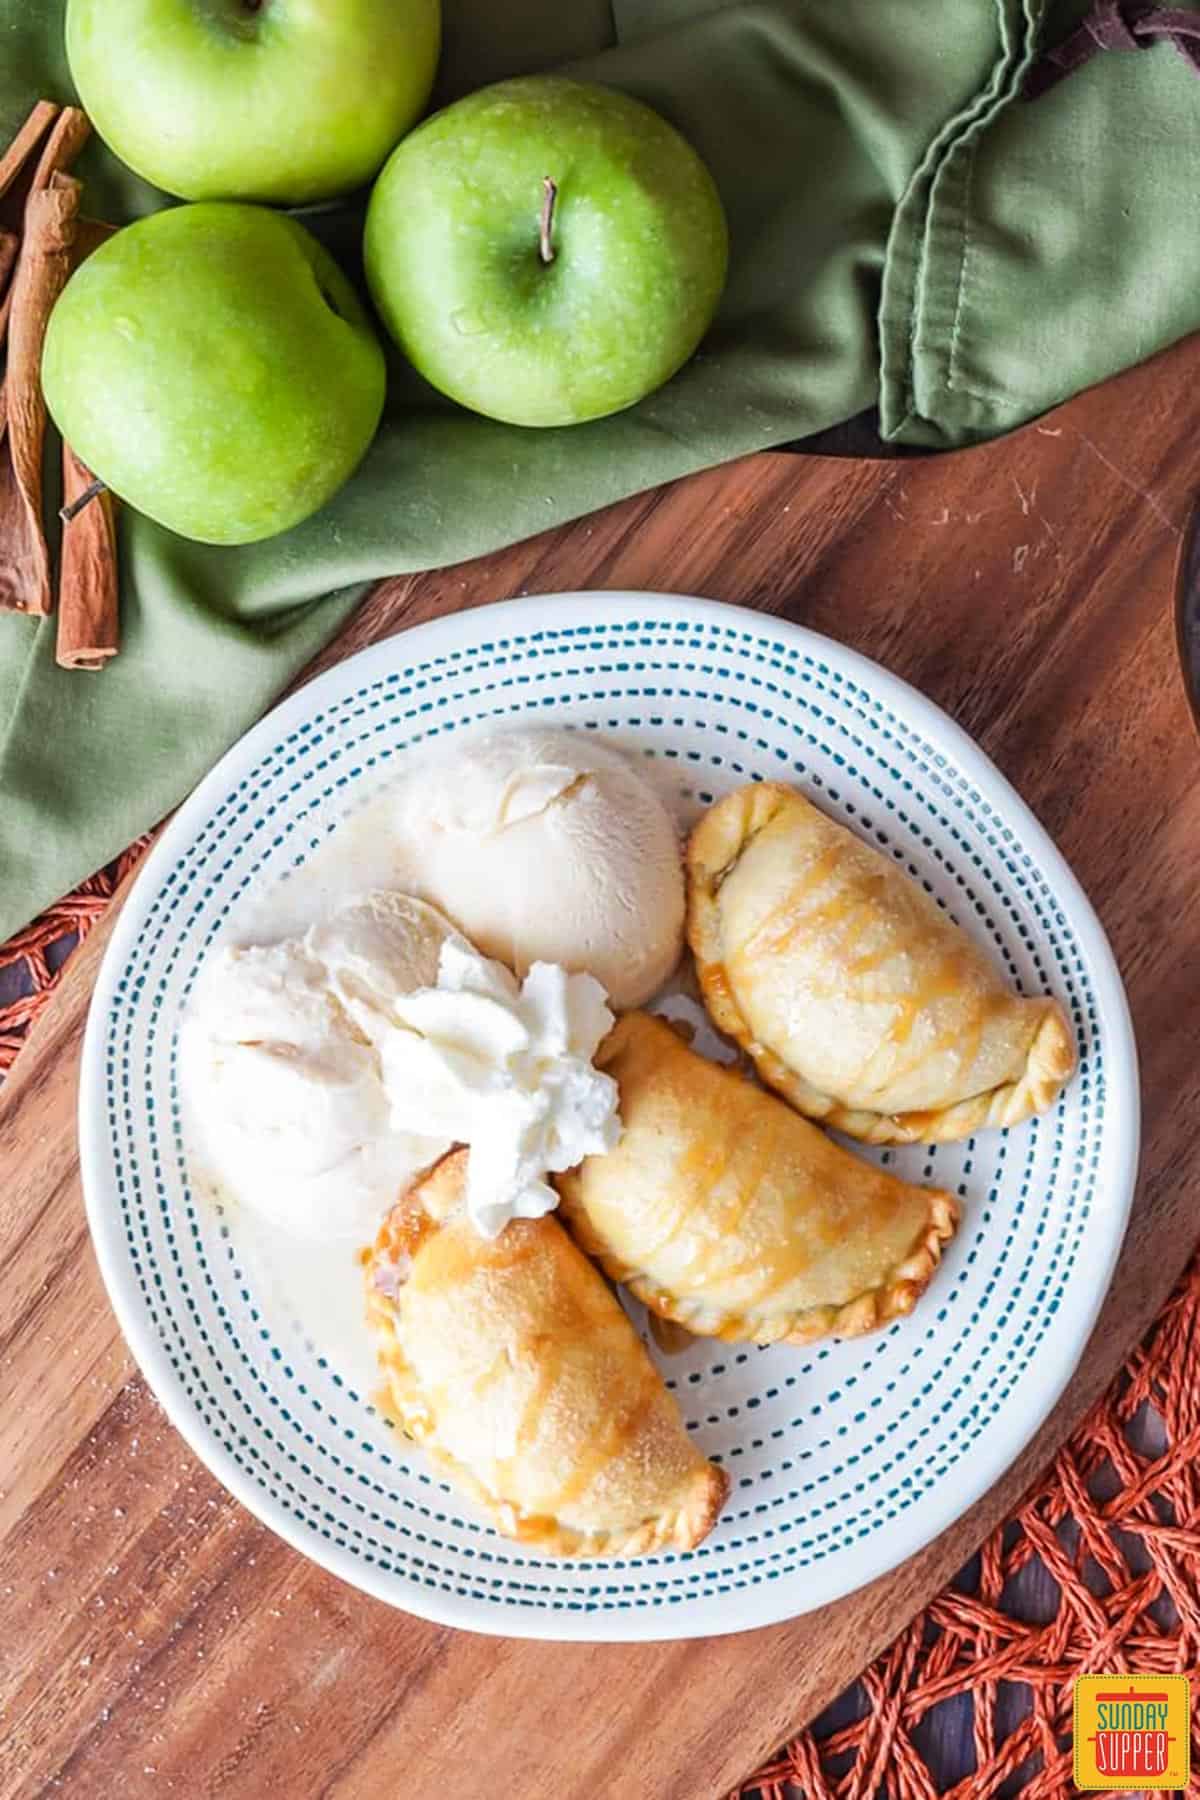 a plate of empanadas with vanilla ice cream and whipped cream on a plate next to a tea towel, green apples and cinnamon sticks